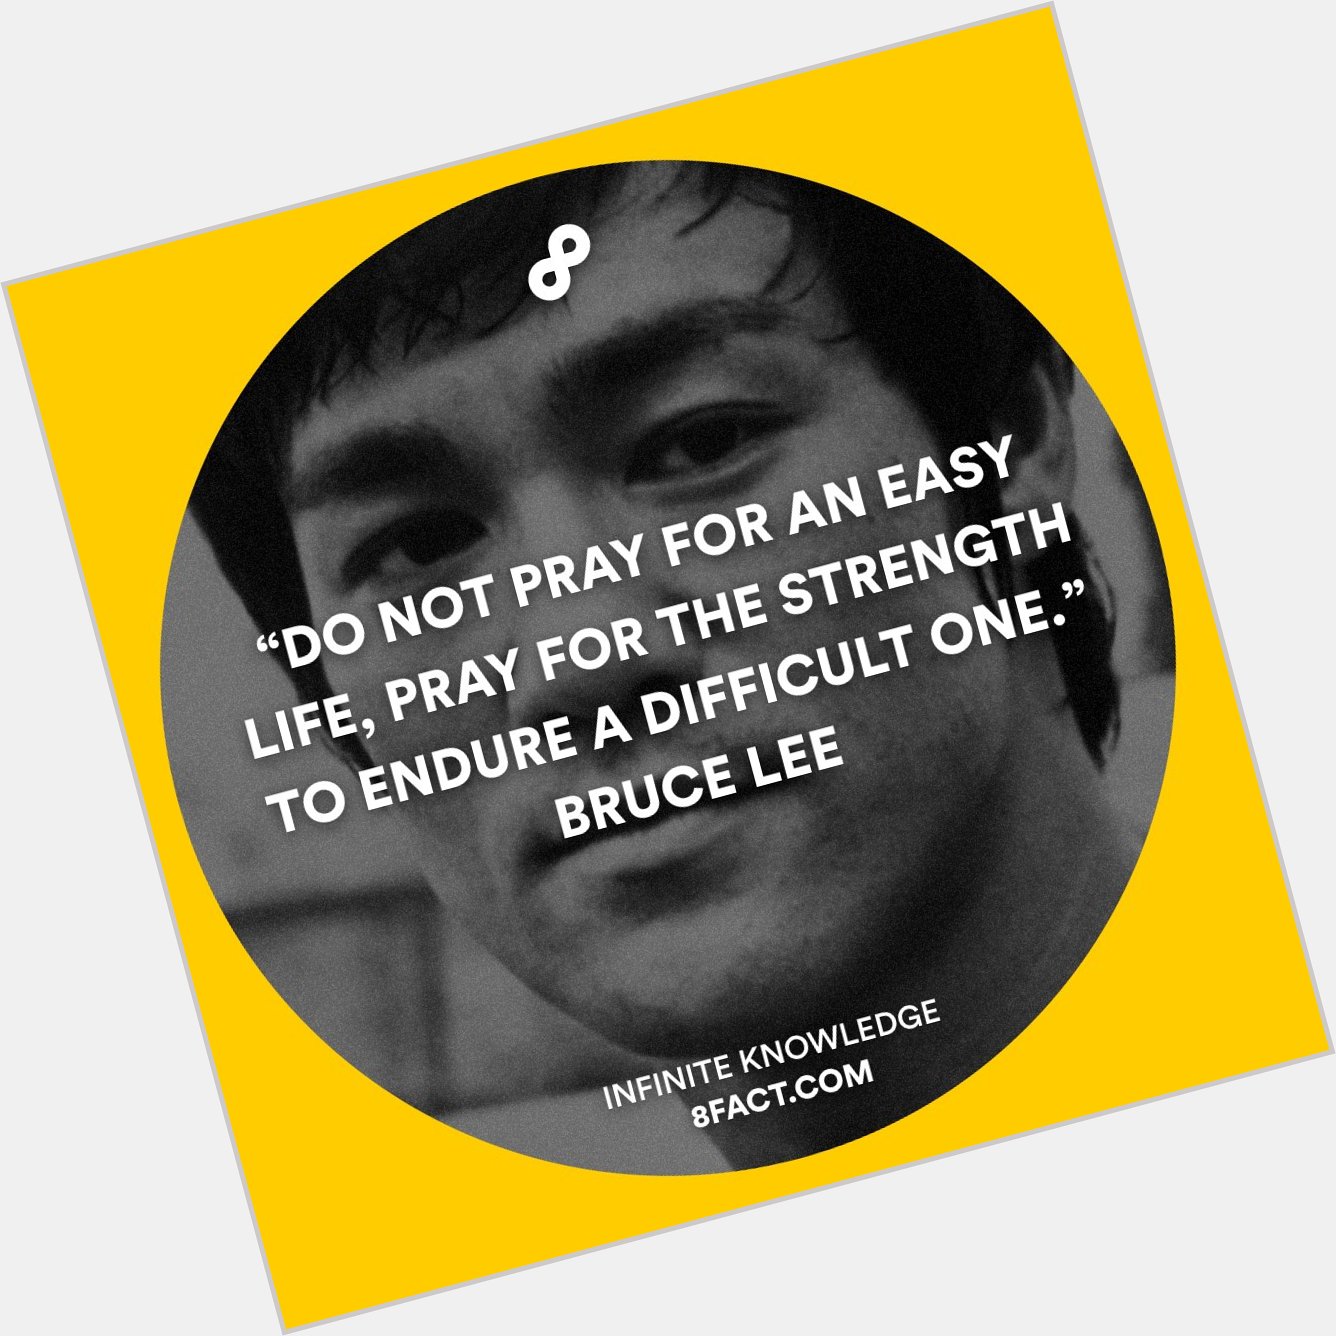 Remessage this to spread Bruce Lee\s invincible spirit!
Happy birthday Bruce Lee! 